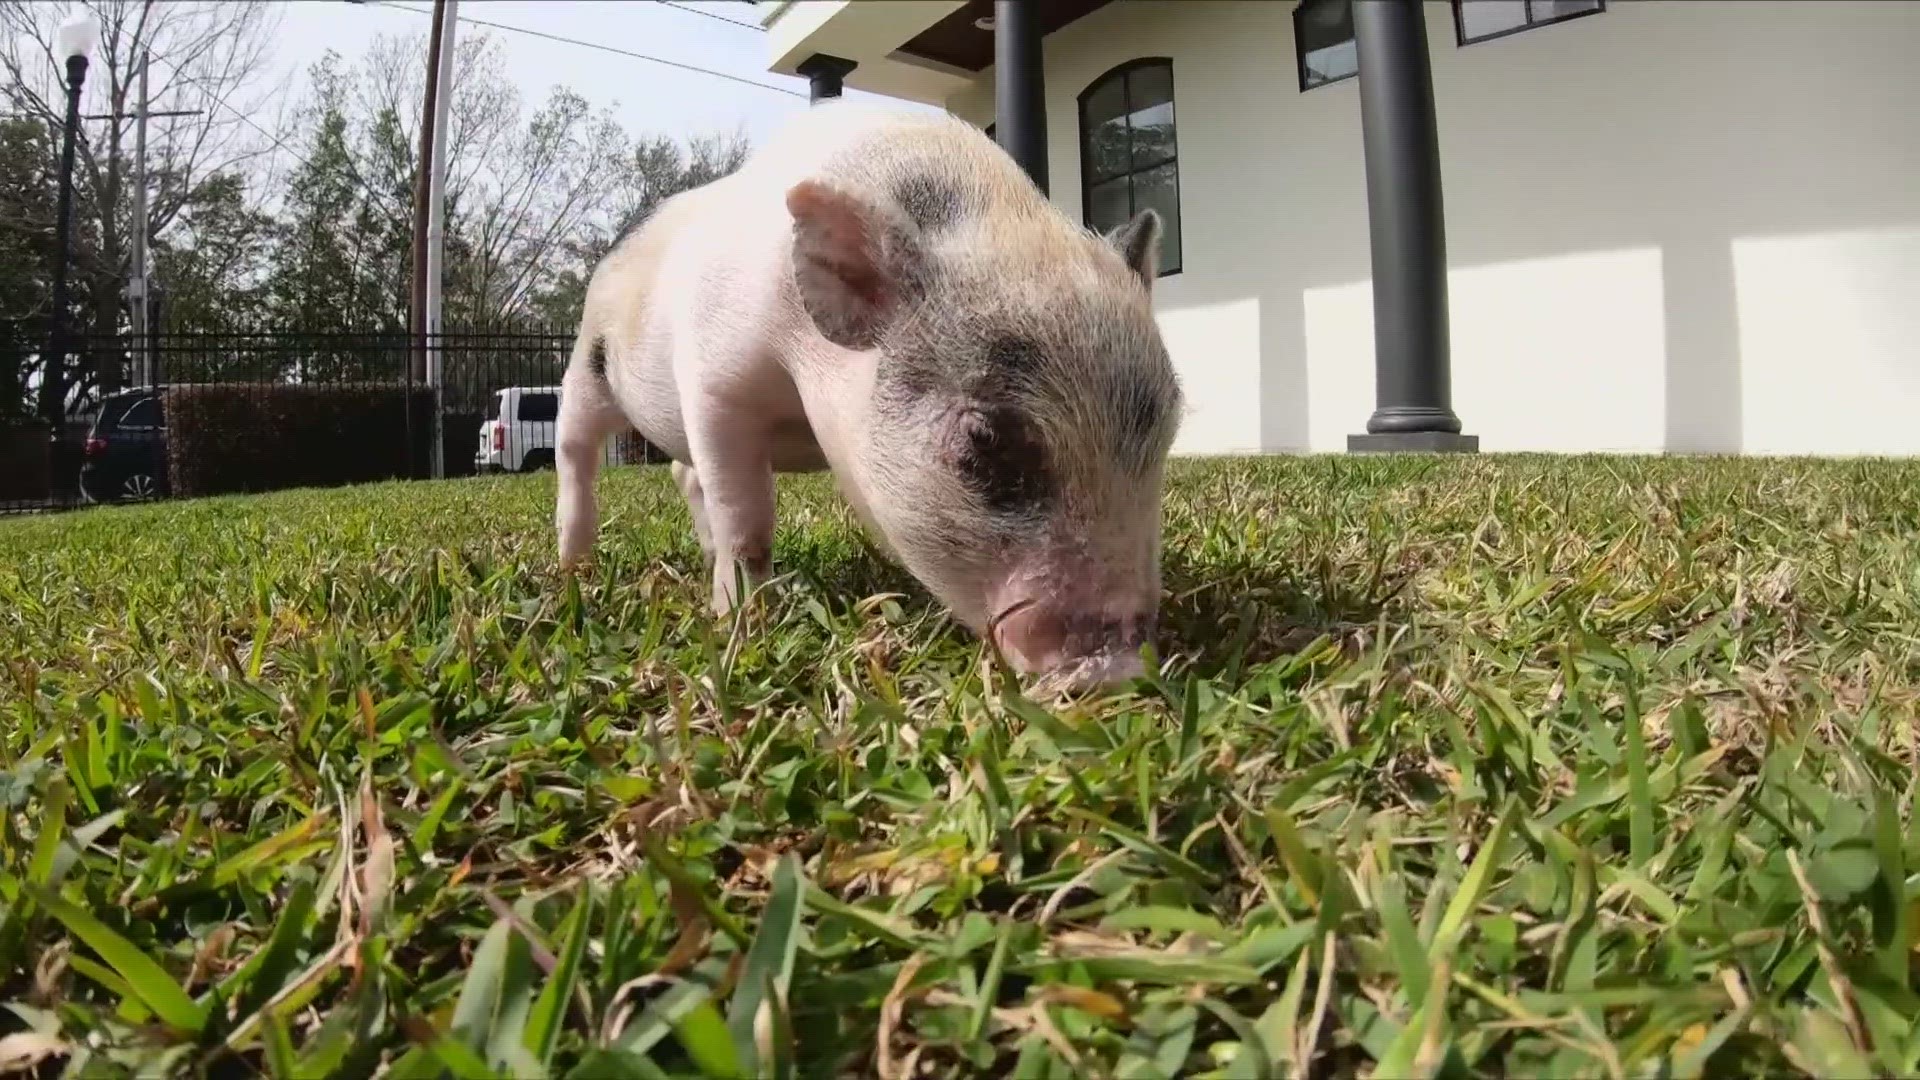 The Humane Society of Louisiana says a piglet was rescued during carnival after they say people were tossing it around.